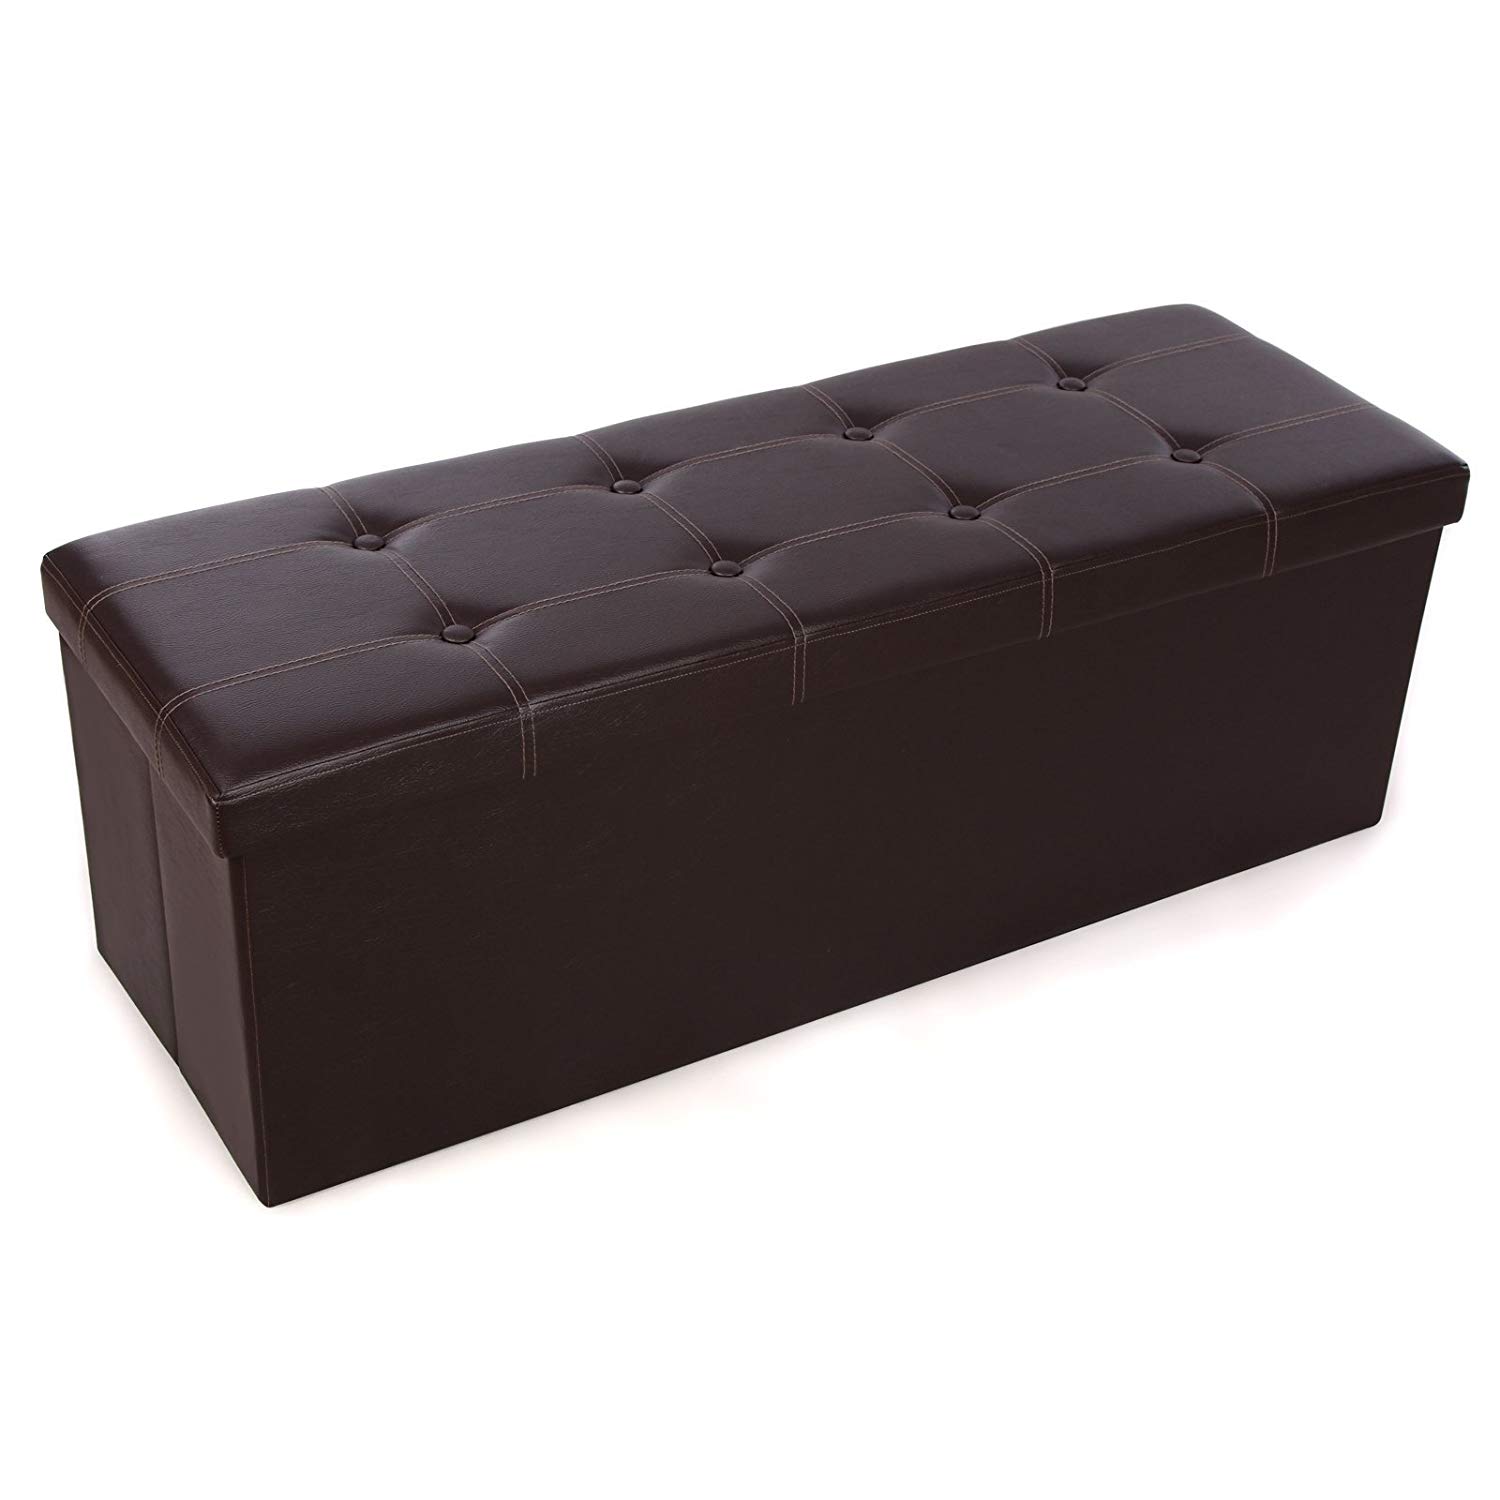 SONGMICS 43-Inch Faux Leather Folding Storage Ottoman Bench, ULSF703